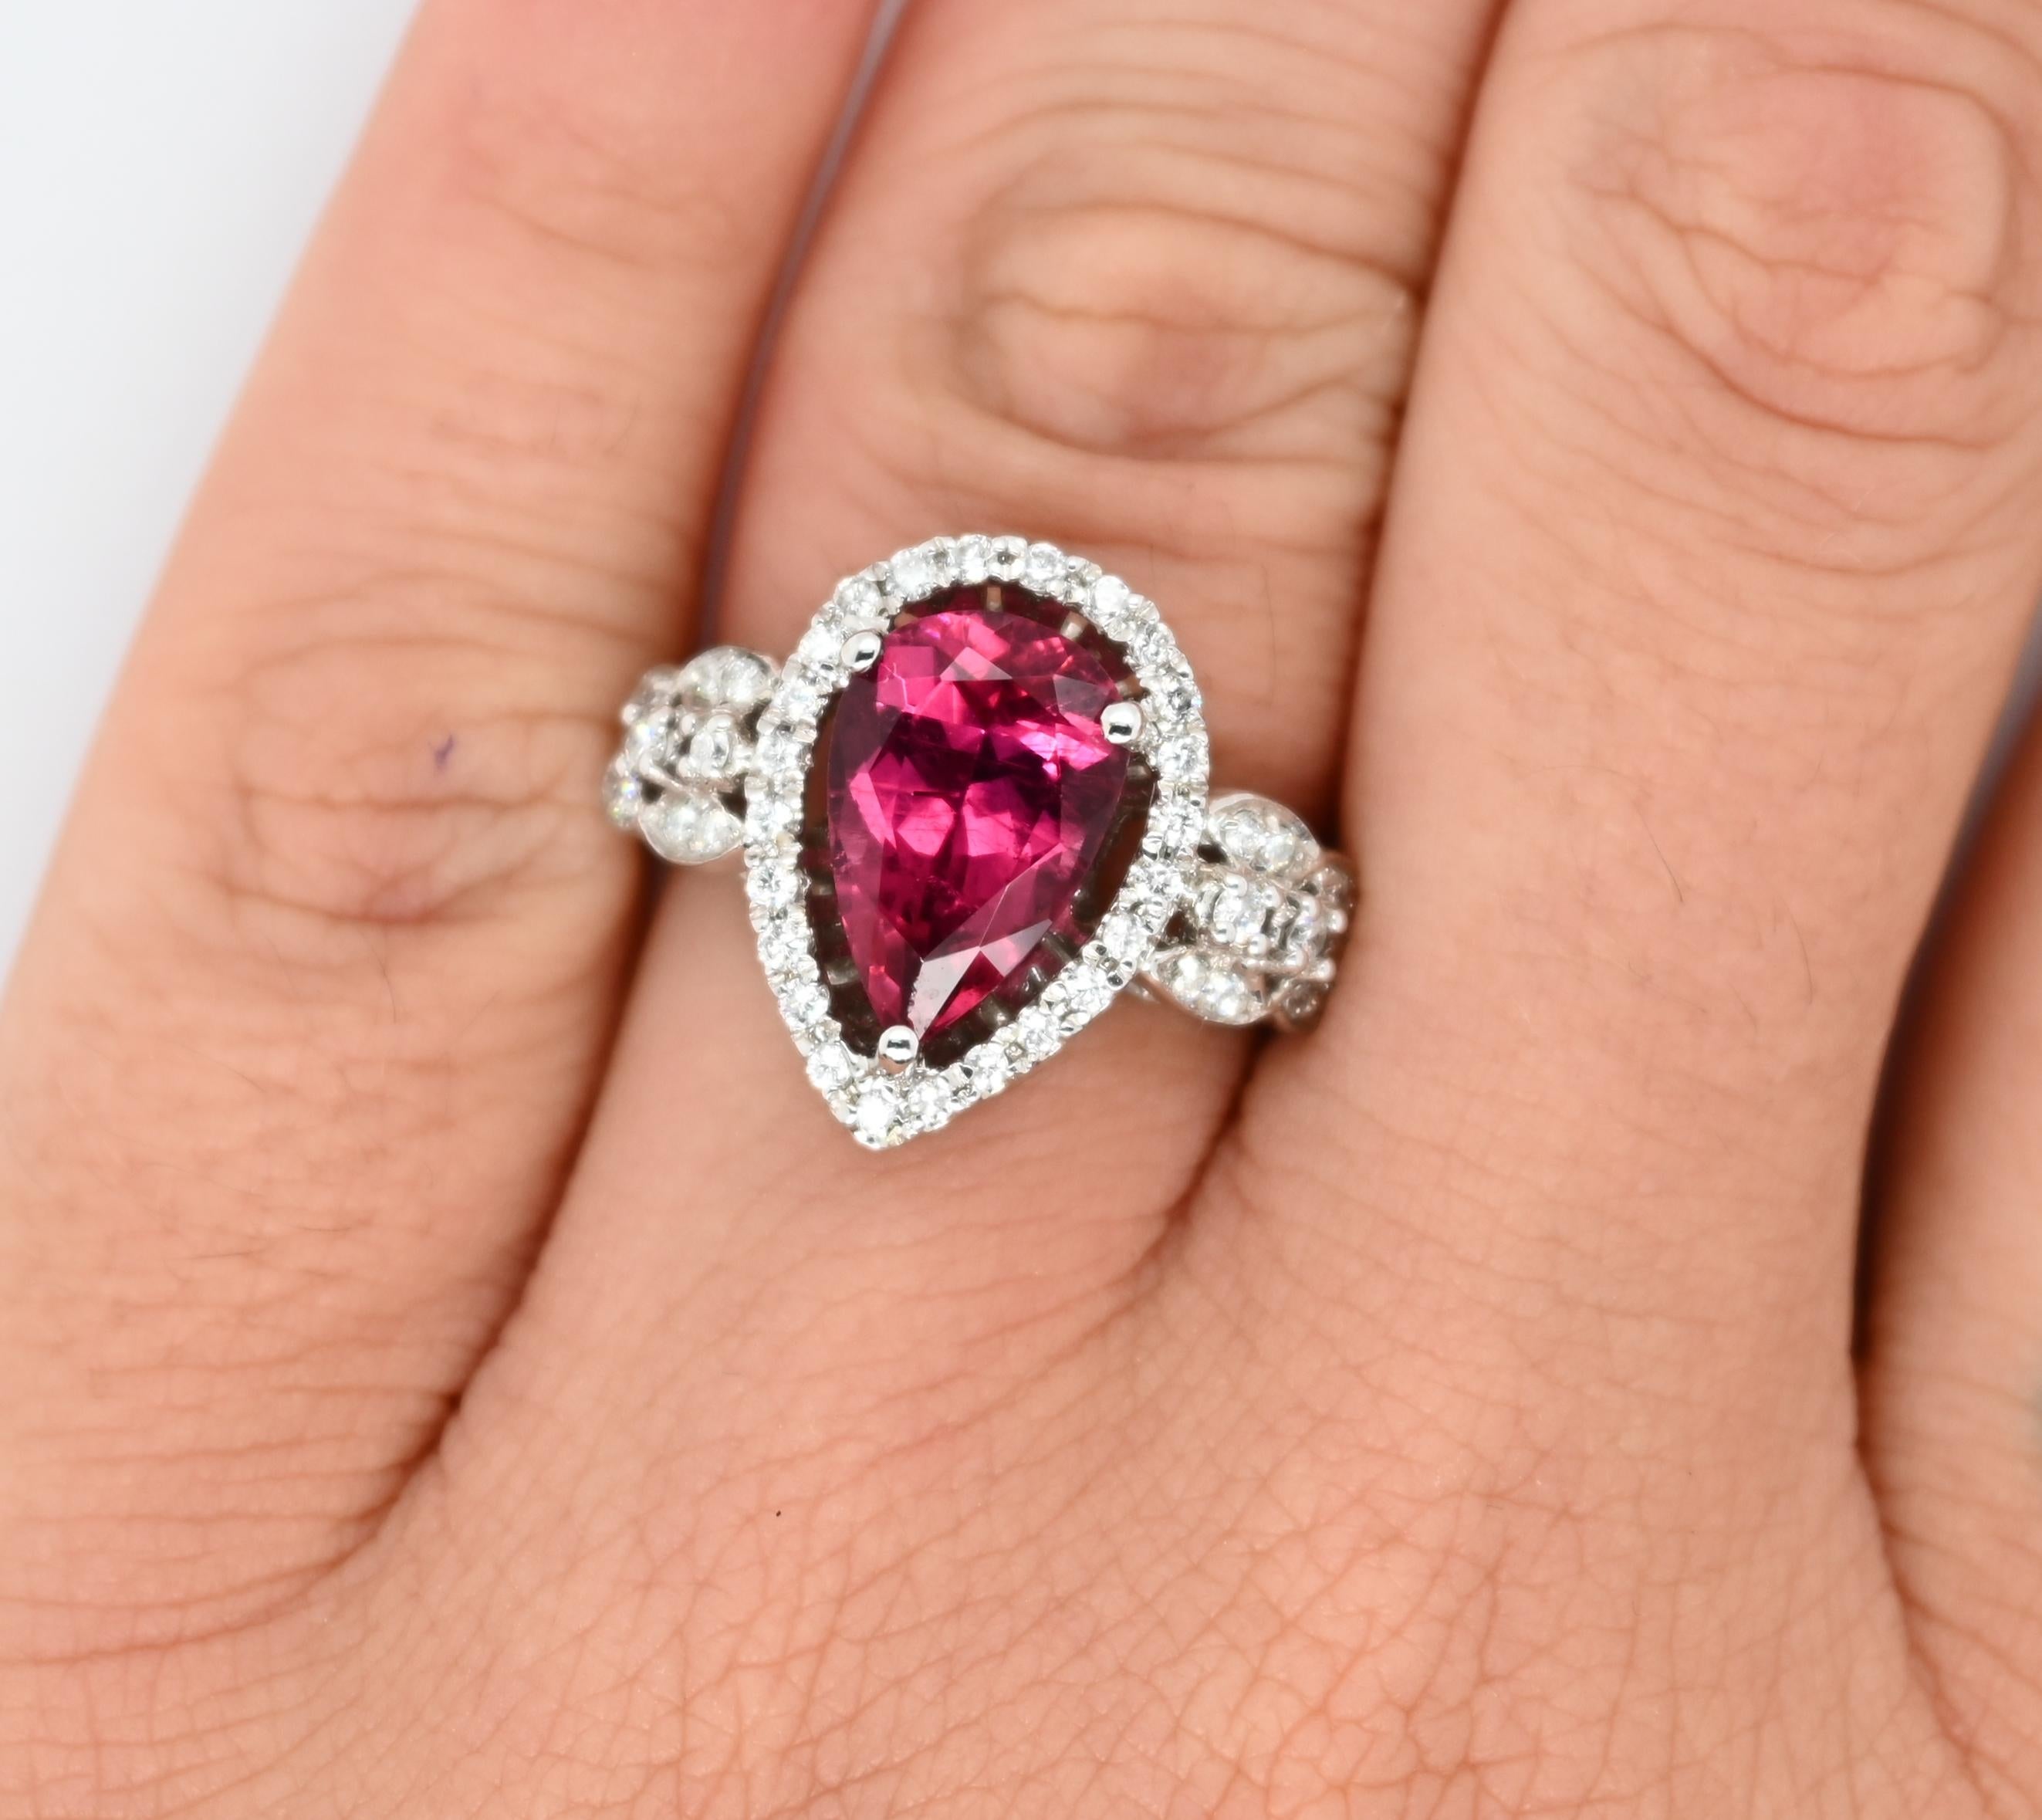 Features 0.93 carats of white diamonds and 3.28 carats of pink tourmaline. 